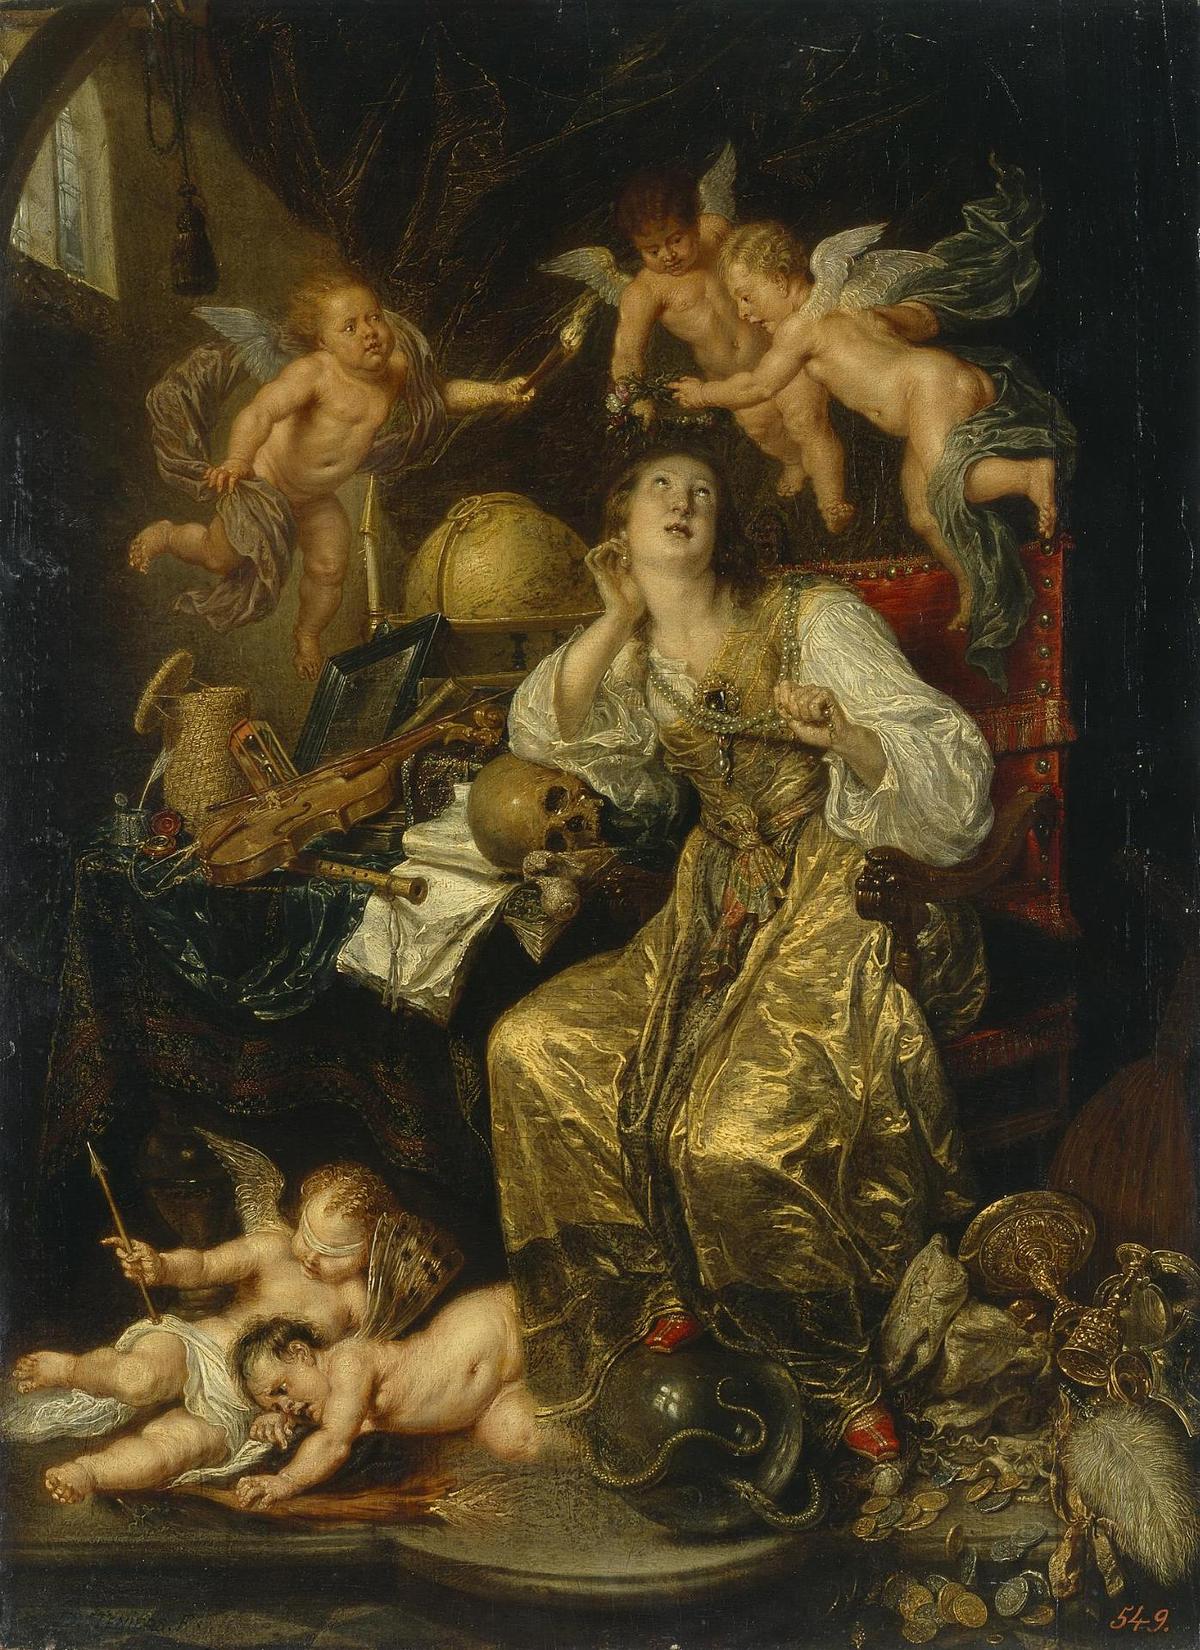 "Allegory of Prudence Triumphing Over Vanity (Allegory of Faith)," 1651–90, by David Teniers the Younger. Oil on panel. Hermitage Museum, Saint Petersburg, Russia. (Public Domain)